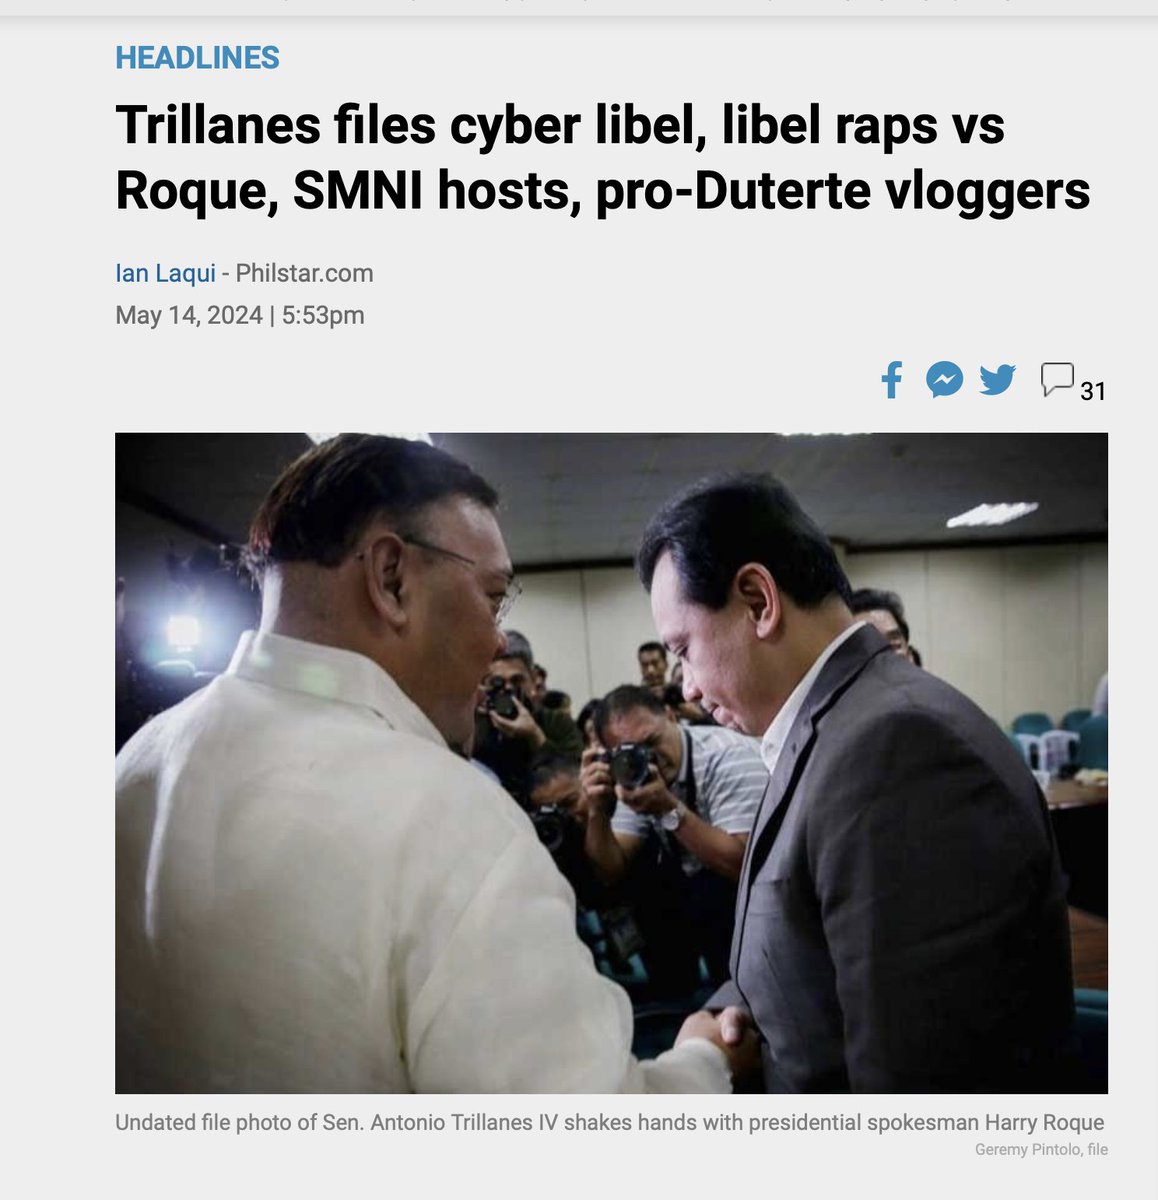 Trillanes vs. Duterte Supporters Yesterday, former Senator Trillanes filed cases against known Duterte supporters including the former presidential spokesperson Harry Roque and social media influencer Banat By. Wait, there’s more! He also filed separate NBI complaints against